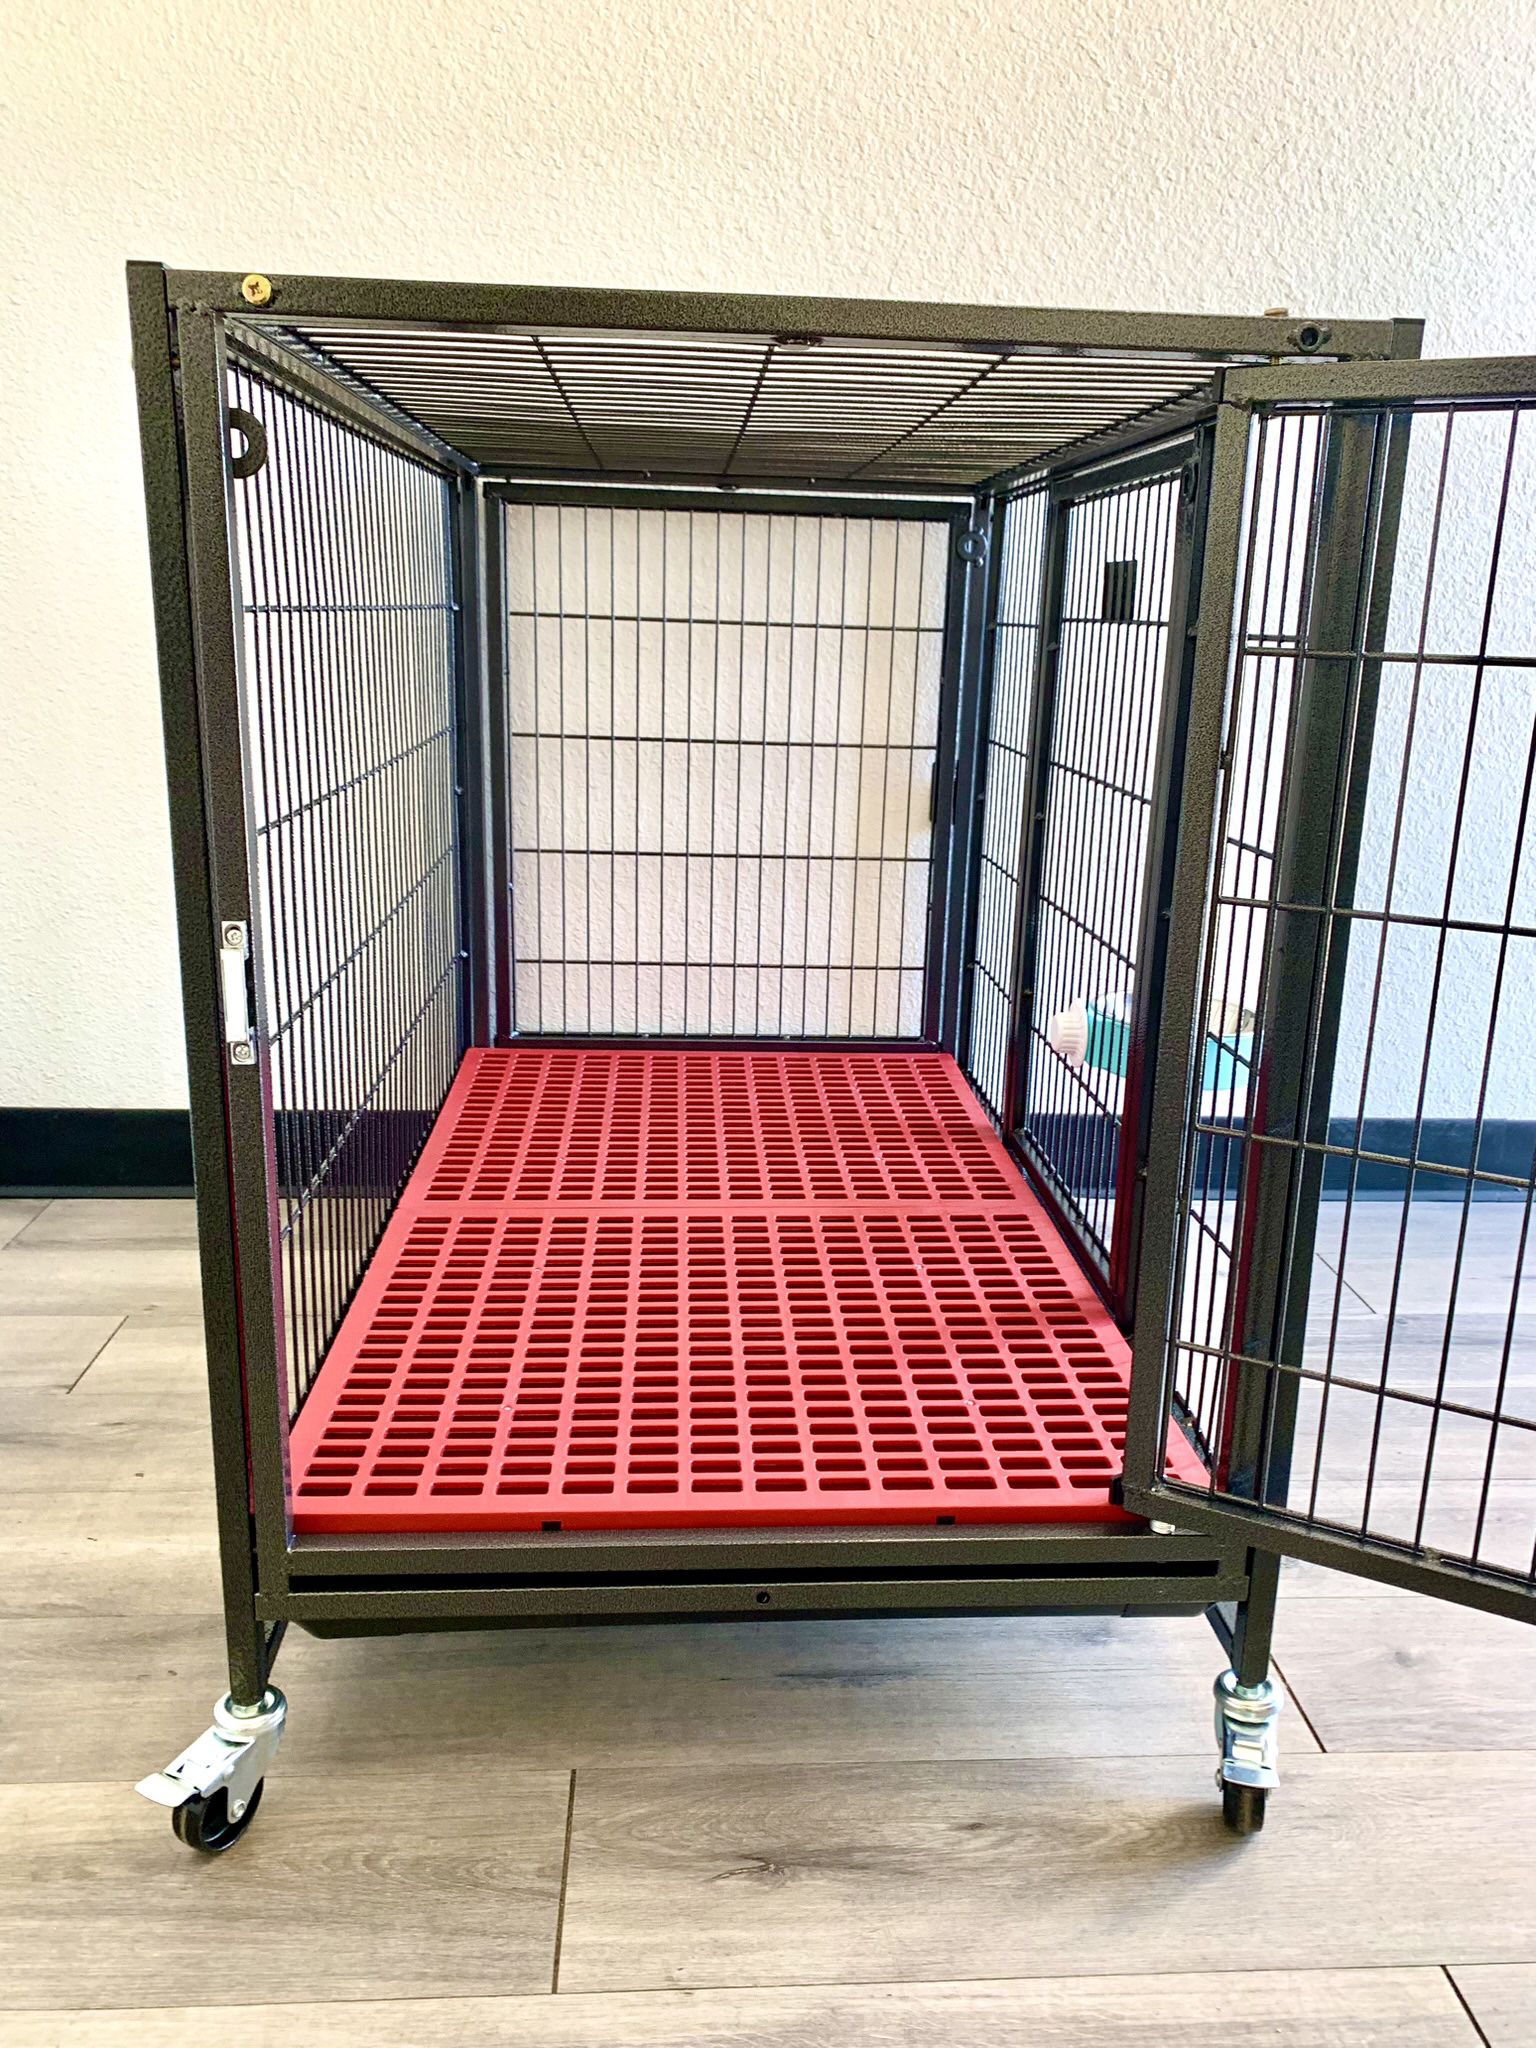 ✅New in Box 📦 HD Dog Pet Kennel Cage transporter 🐕🐶🐾❤️COMFY PLASTIC FLOOR❤️🐾☑️Dimensions: 37”L X 23”W X 30”H ☑️ Special Edition 🐶